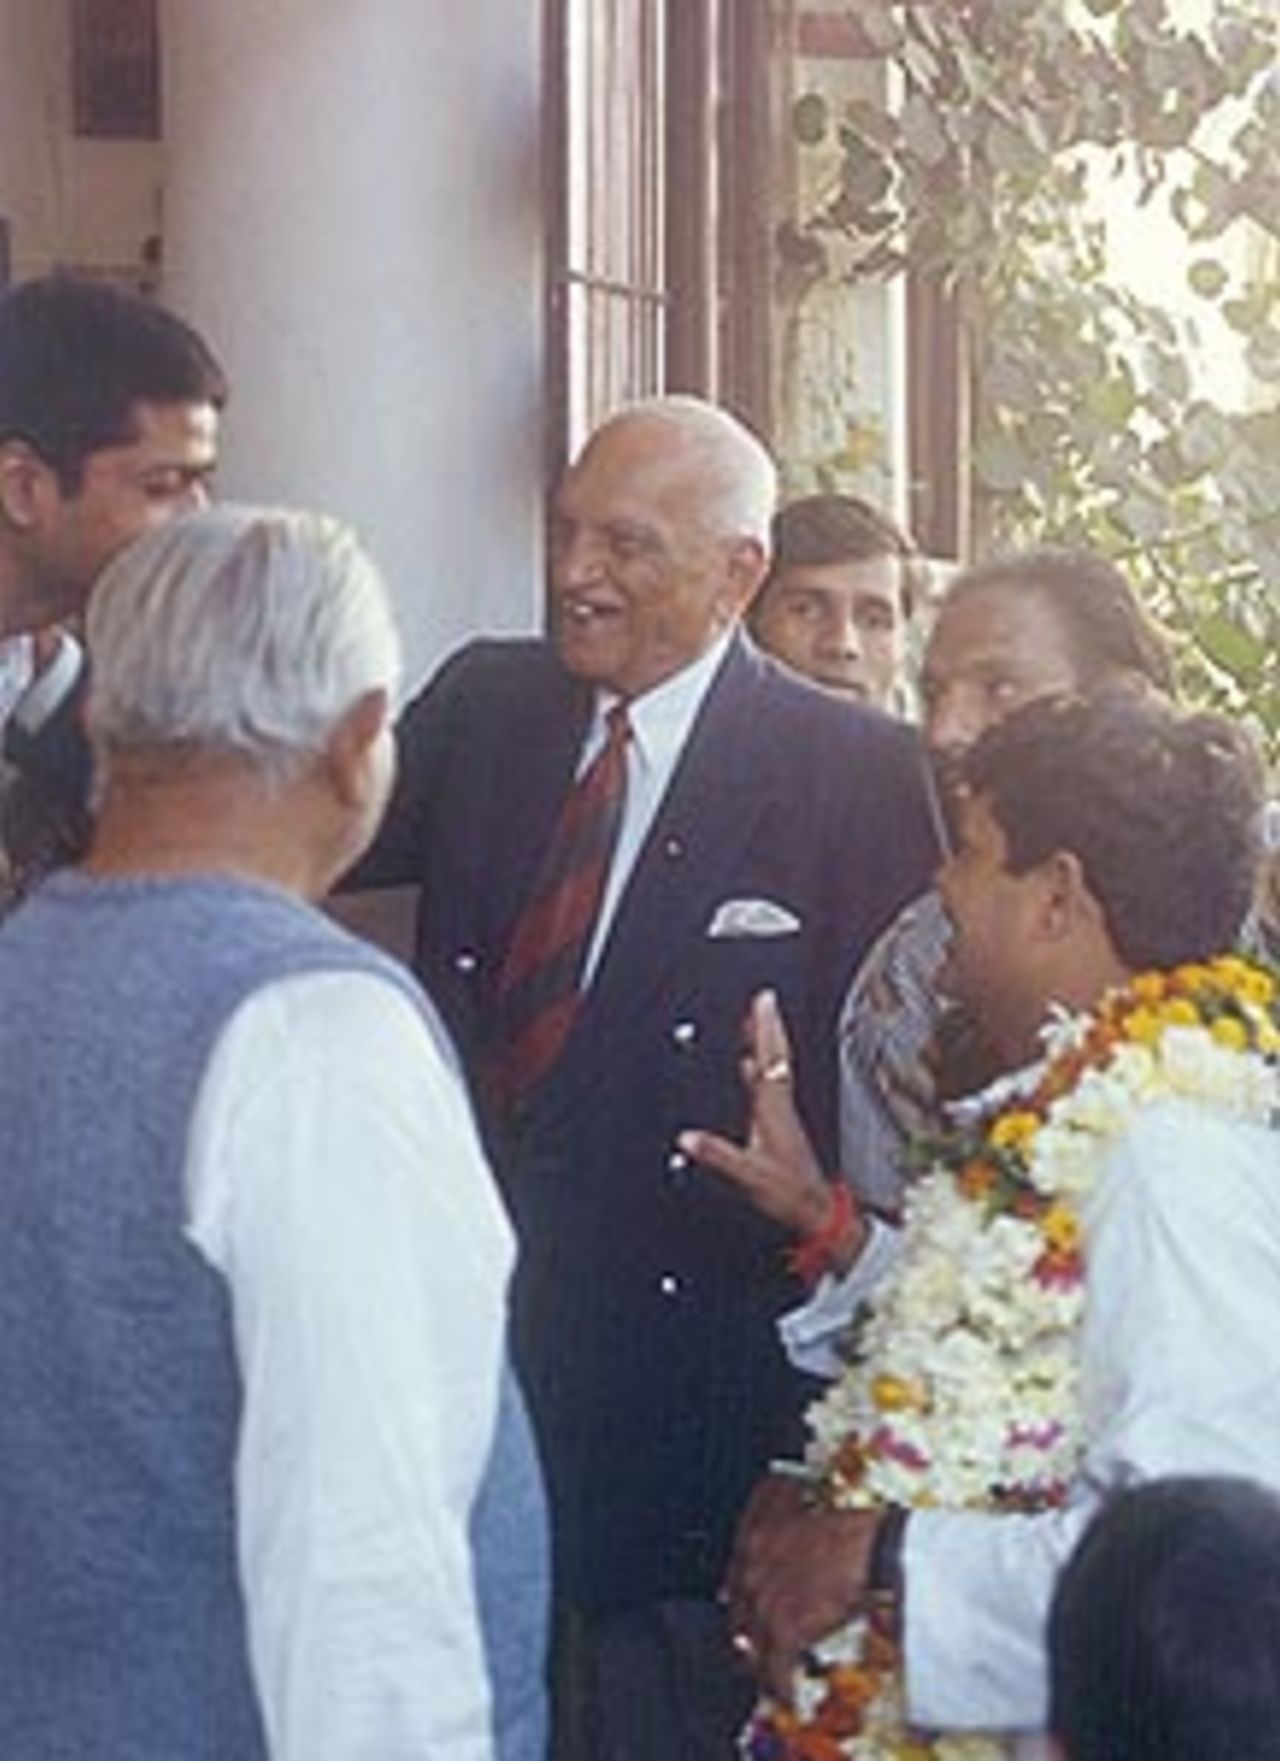 Mushtaq Ali shares a lighter moment with his guests, Indore, December 1999